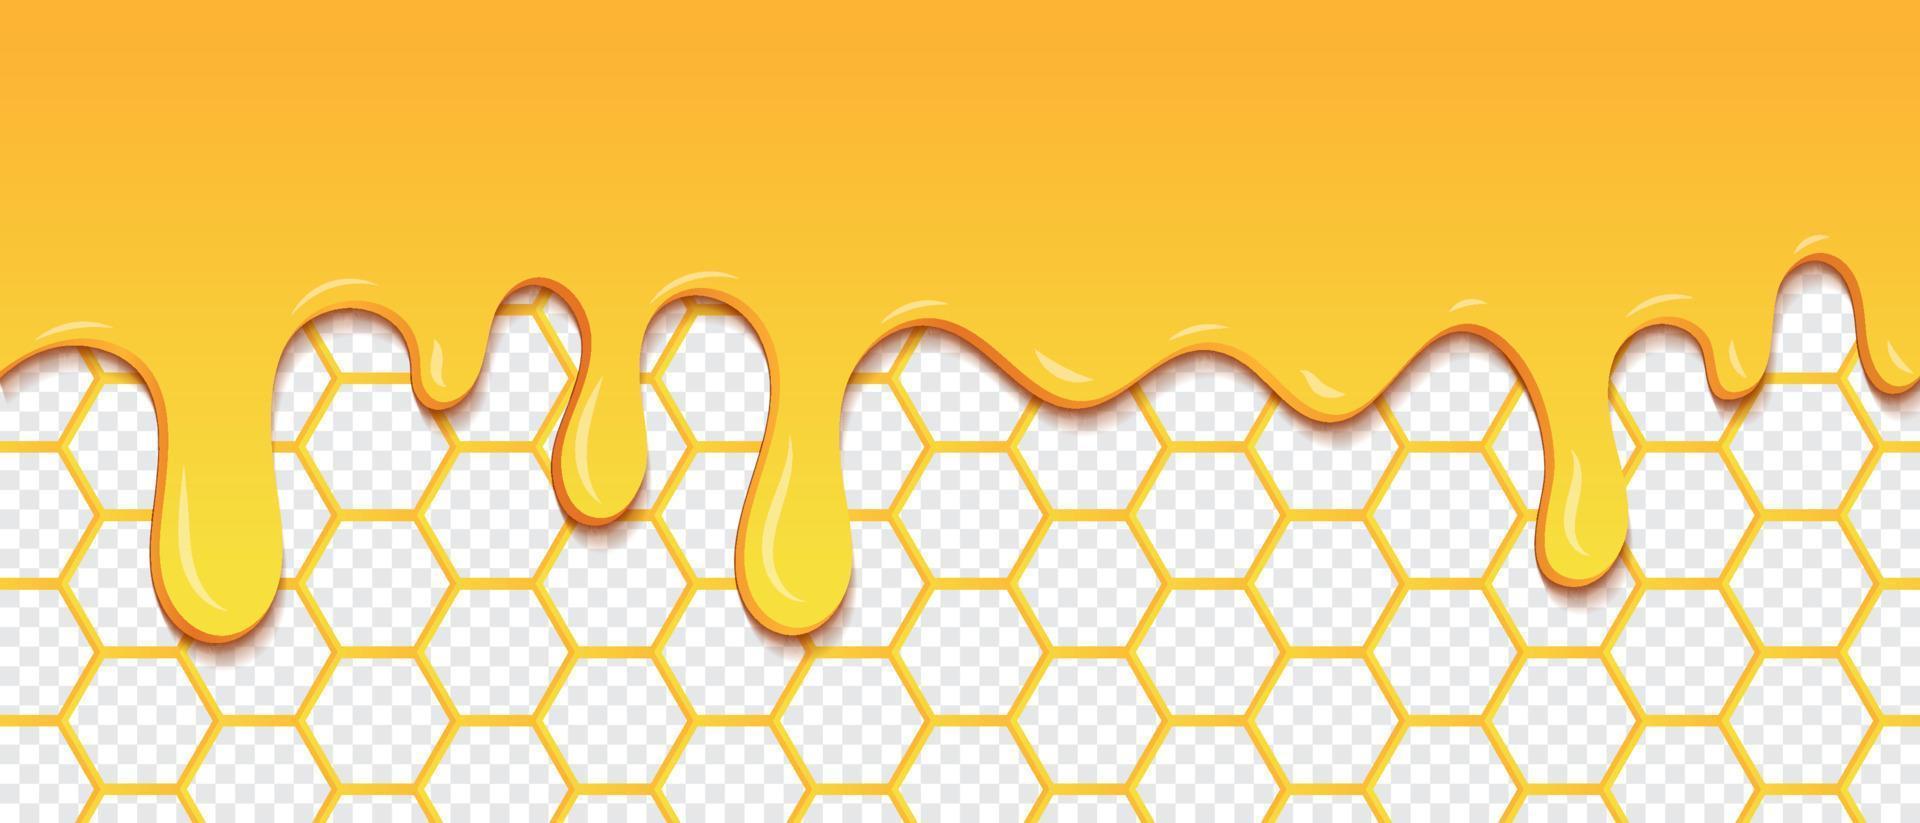 Yellow pattern with honeycomb and honey drips. Dripping honey seamless pattern. Gold honey hexagonal cells seamless texture. Vector illustration